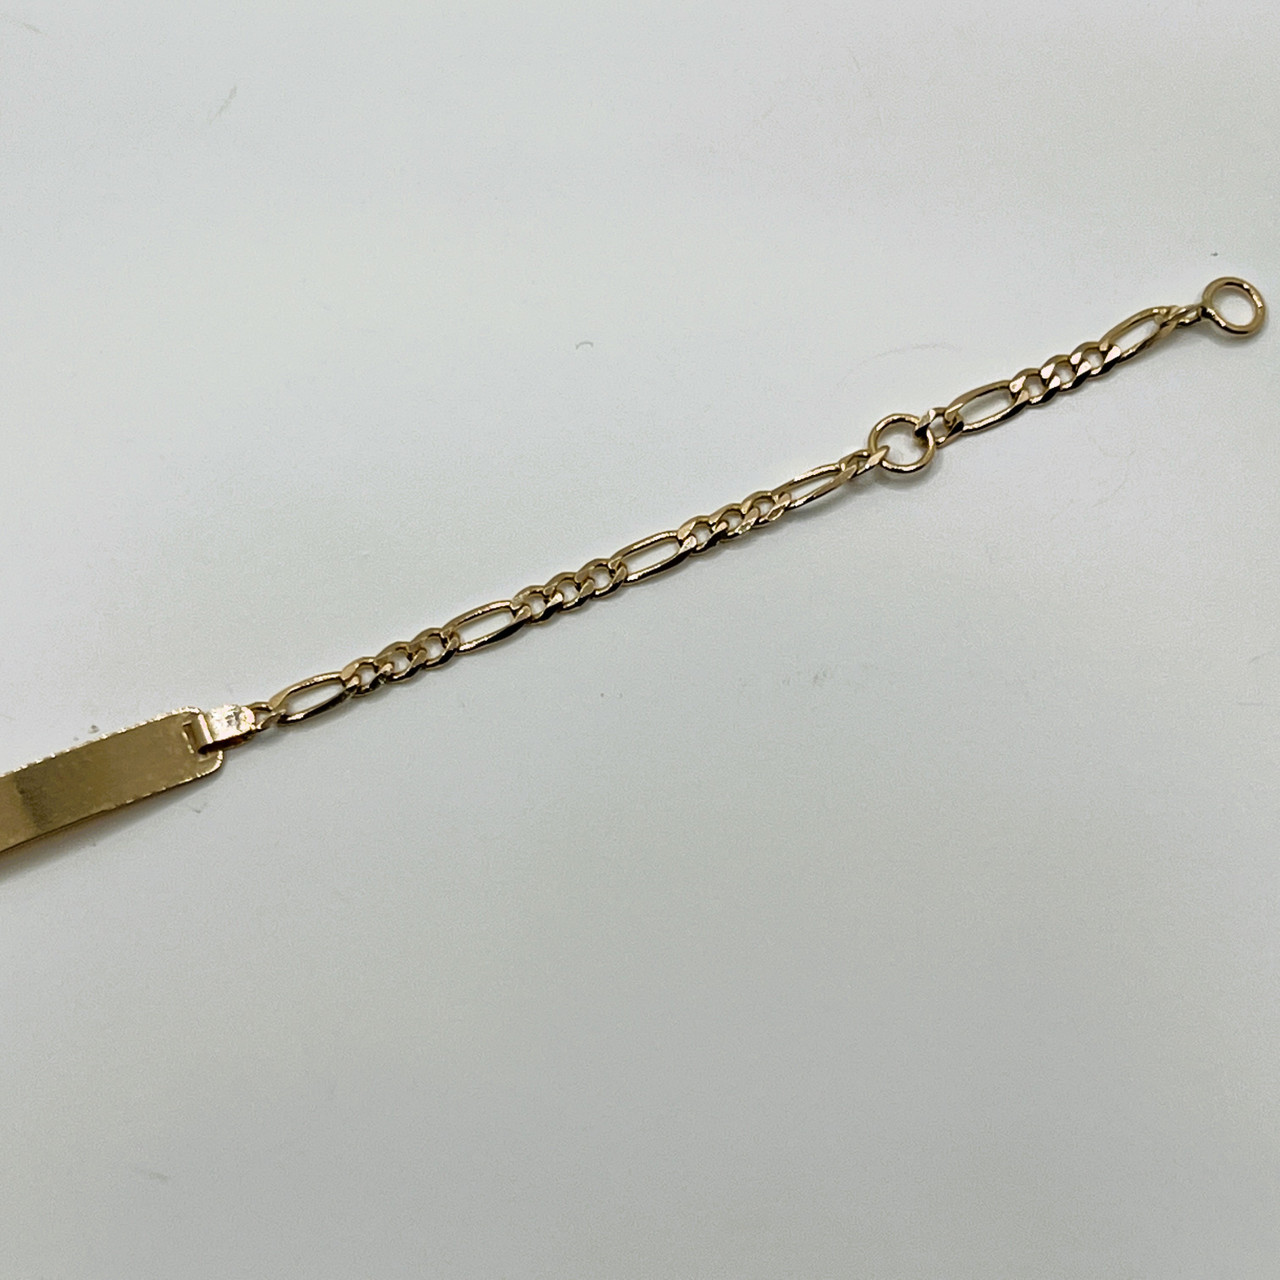 19.2k Portuguese Gold 3 by 1 with ID Plate Thin Bracelet